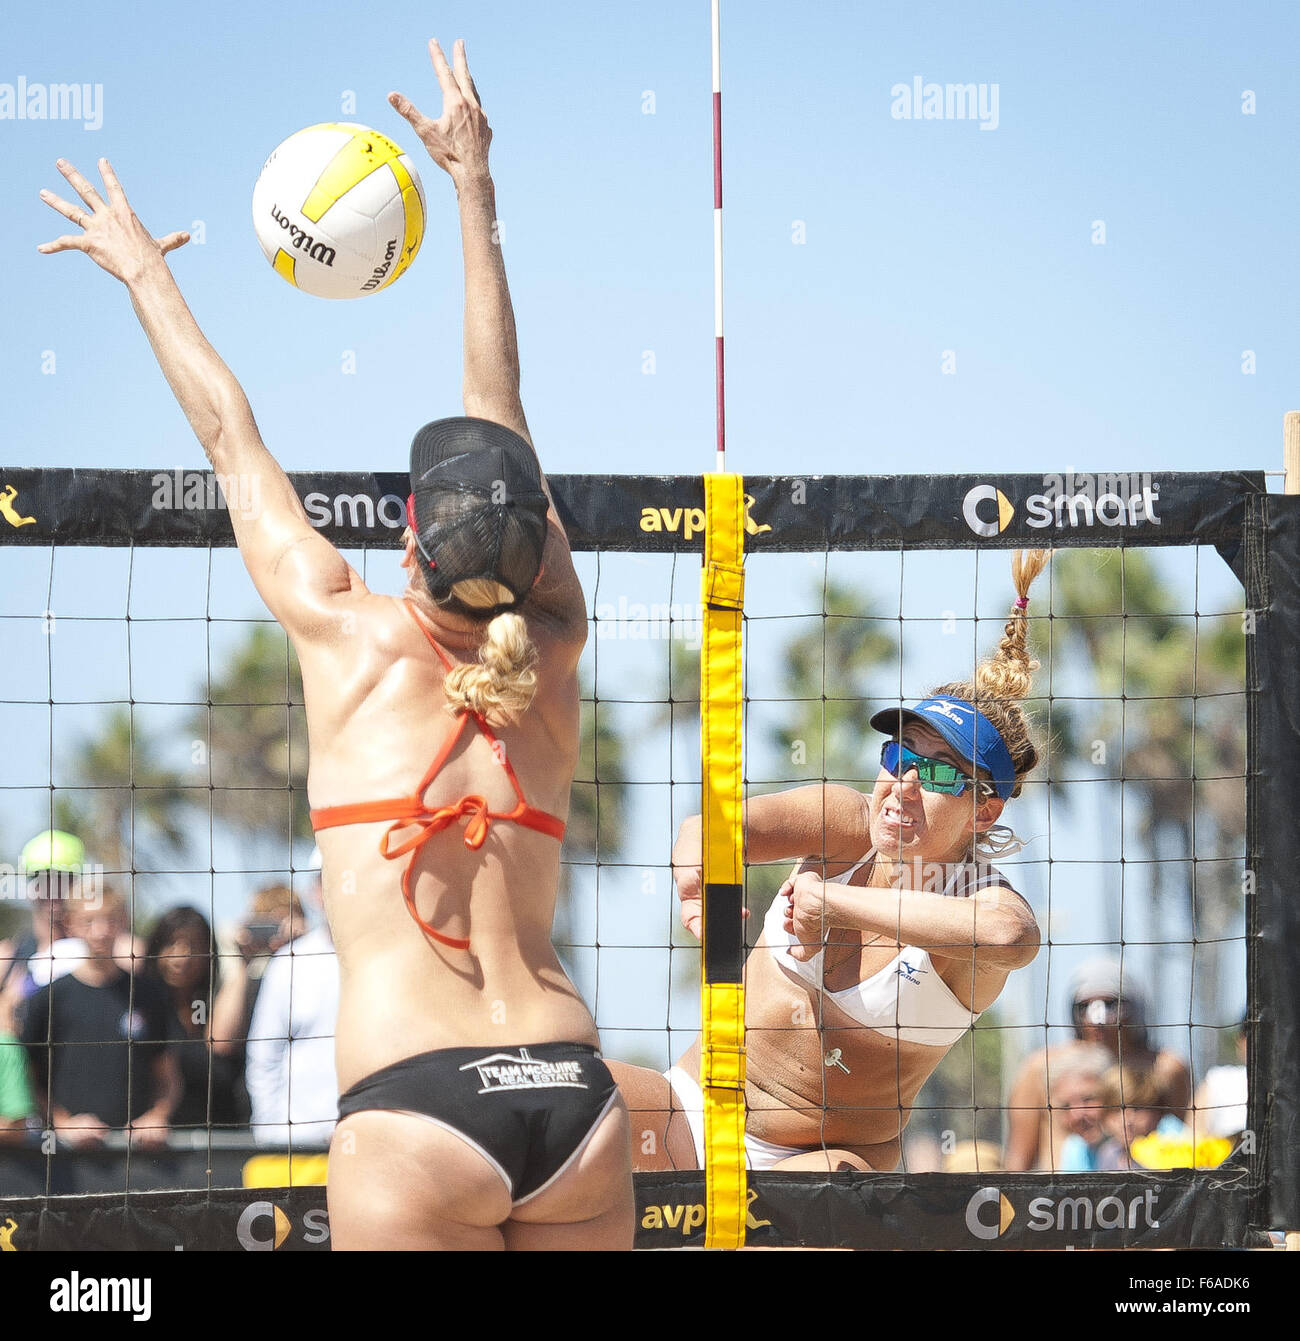 Huntington Beach, California, USA. 21st Sep, 2014. APRIL ROSS with a spike high on the net as HEATHER HUGHES attempts the block on Sunday afternoon ---The AVP Championship Final for men and women ran on Sunday at the Huntington Beach Pier. April Ross, along with teammate Kerri Walsh Jennings took the overall final championship over Heather Hughes and Whitney Pavlik on Sunday afternoon in the women's division. © David Bro/ZUMA Wire/Alamy Live News Stock Photo